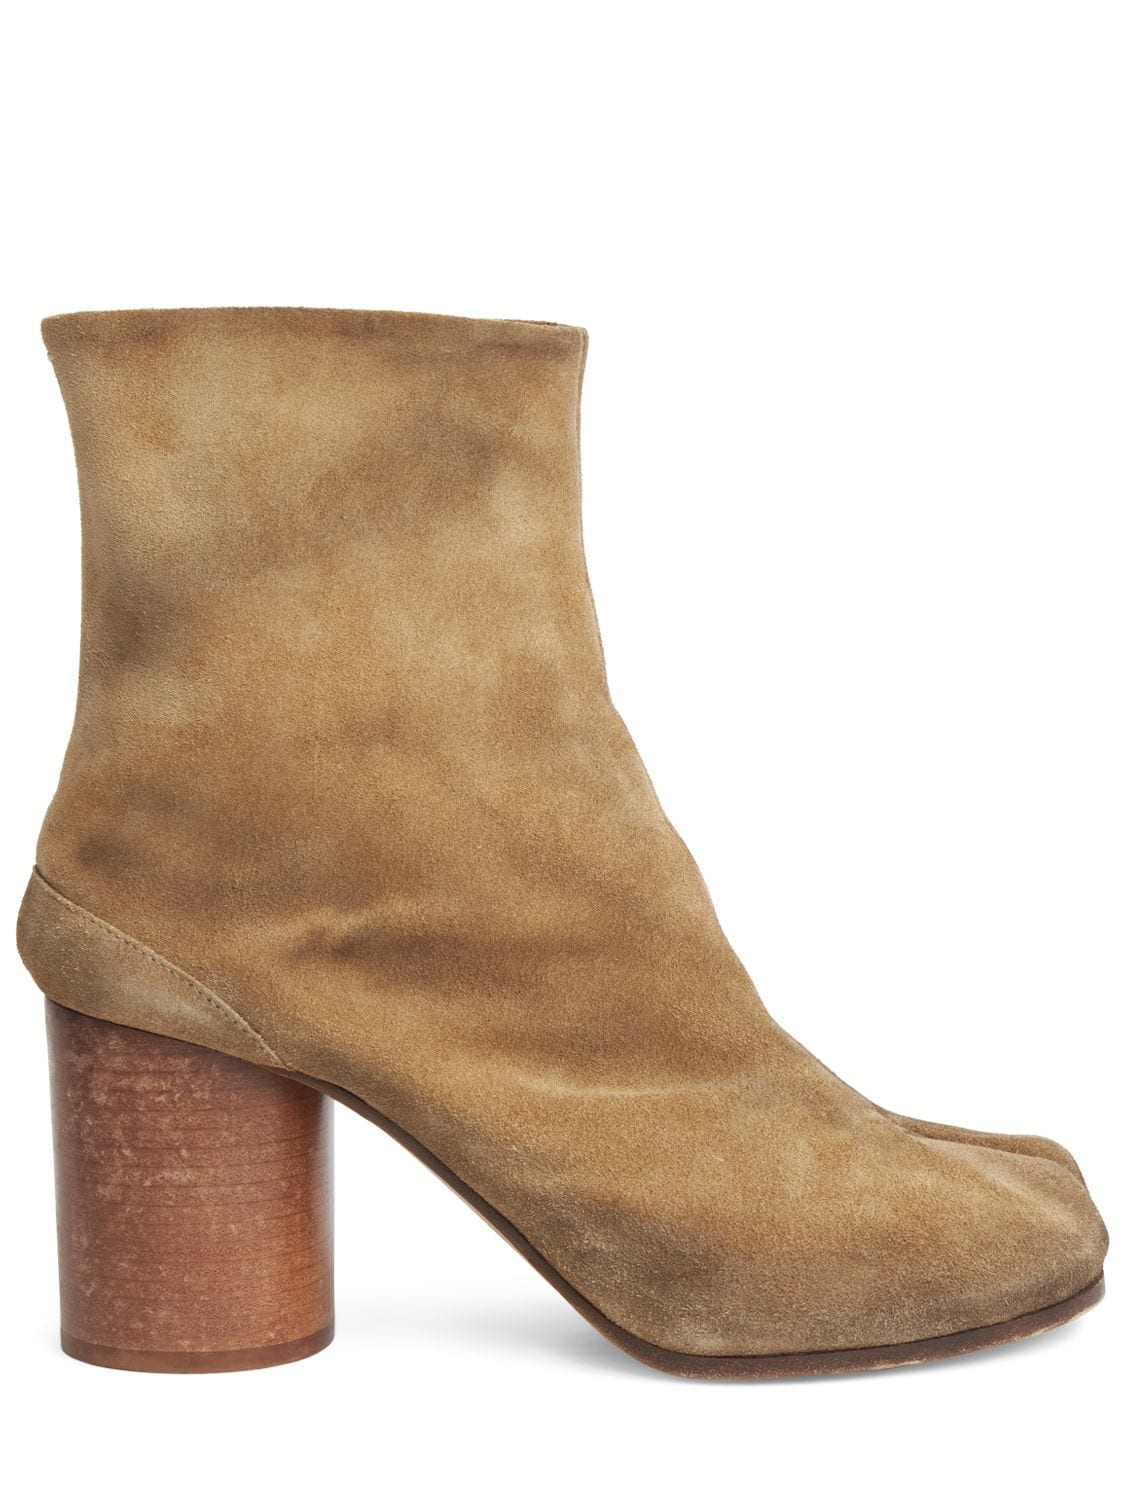 Maison Margiela 80mm Tabi Suede Ankle Boots In Light Brown